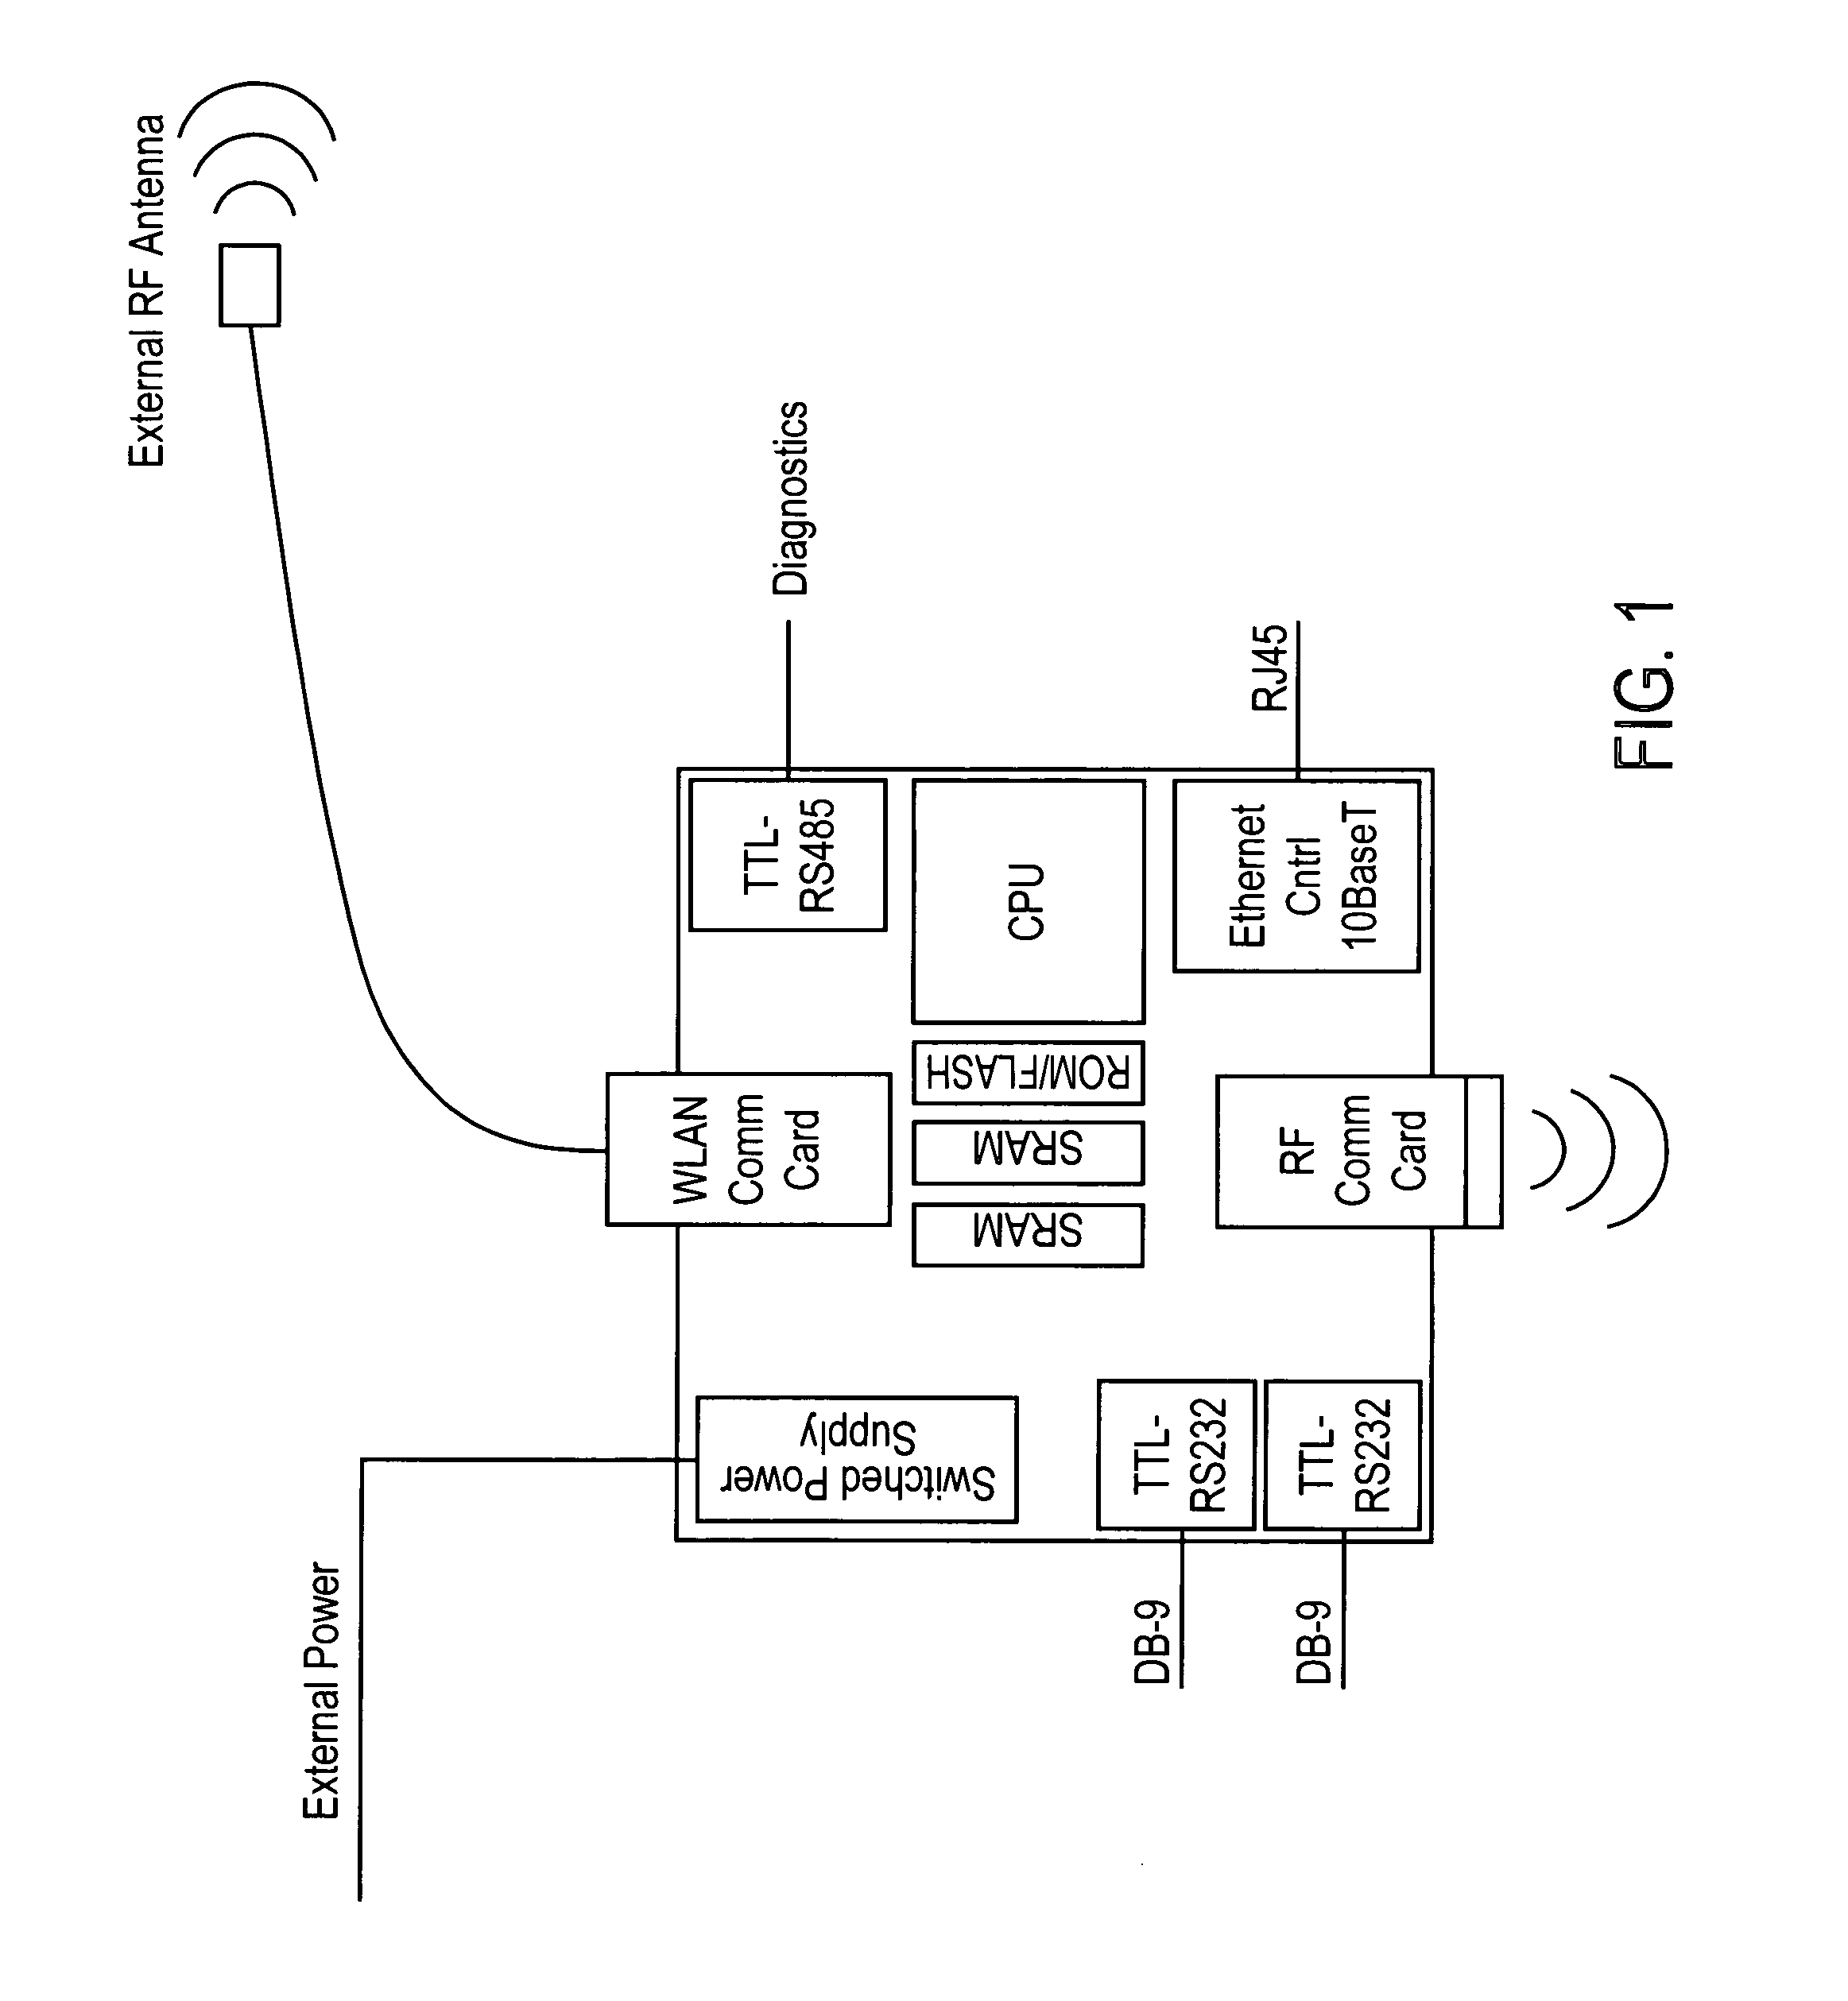 Bridging apparatus for interconnecting a wireless PAN and a wireless LAN